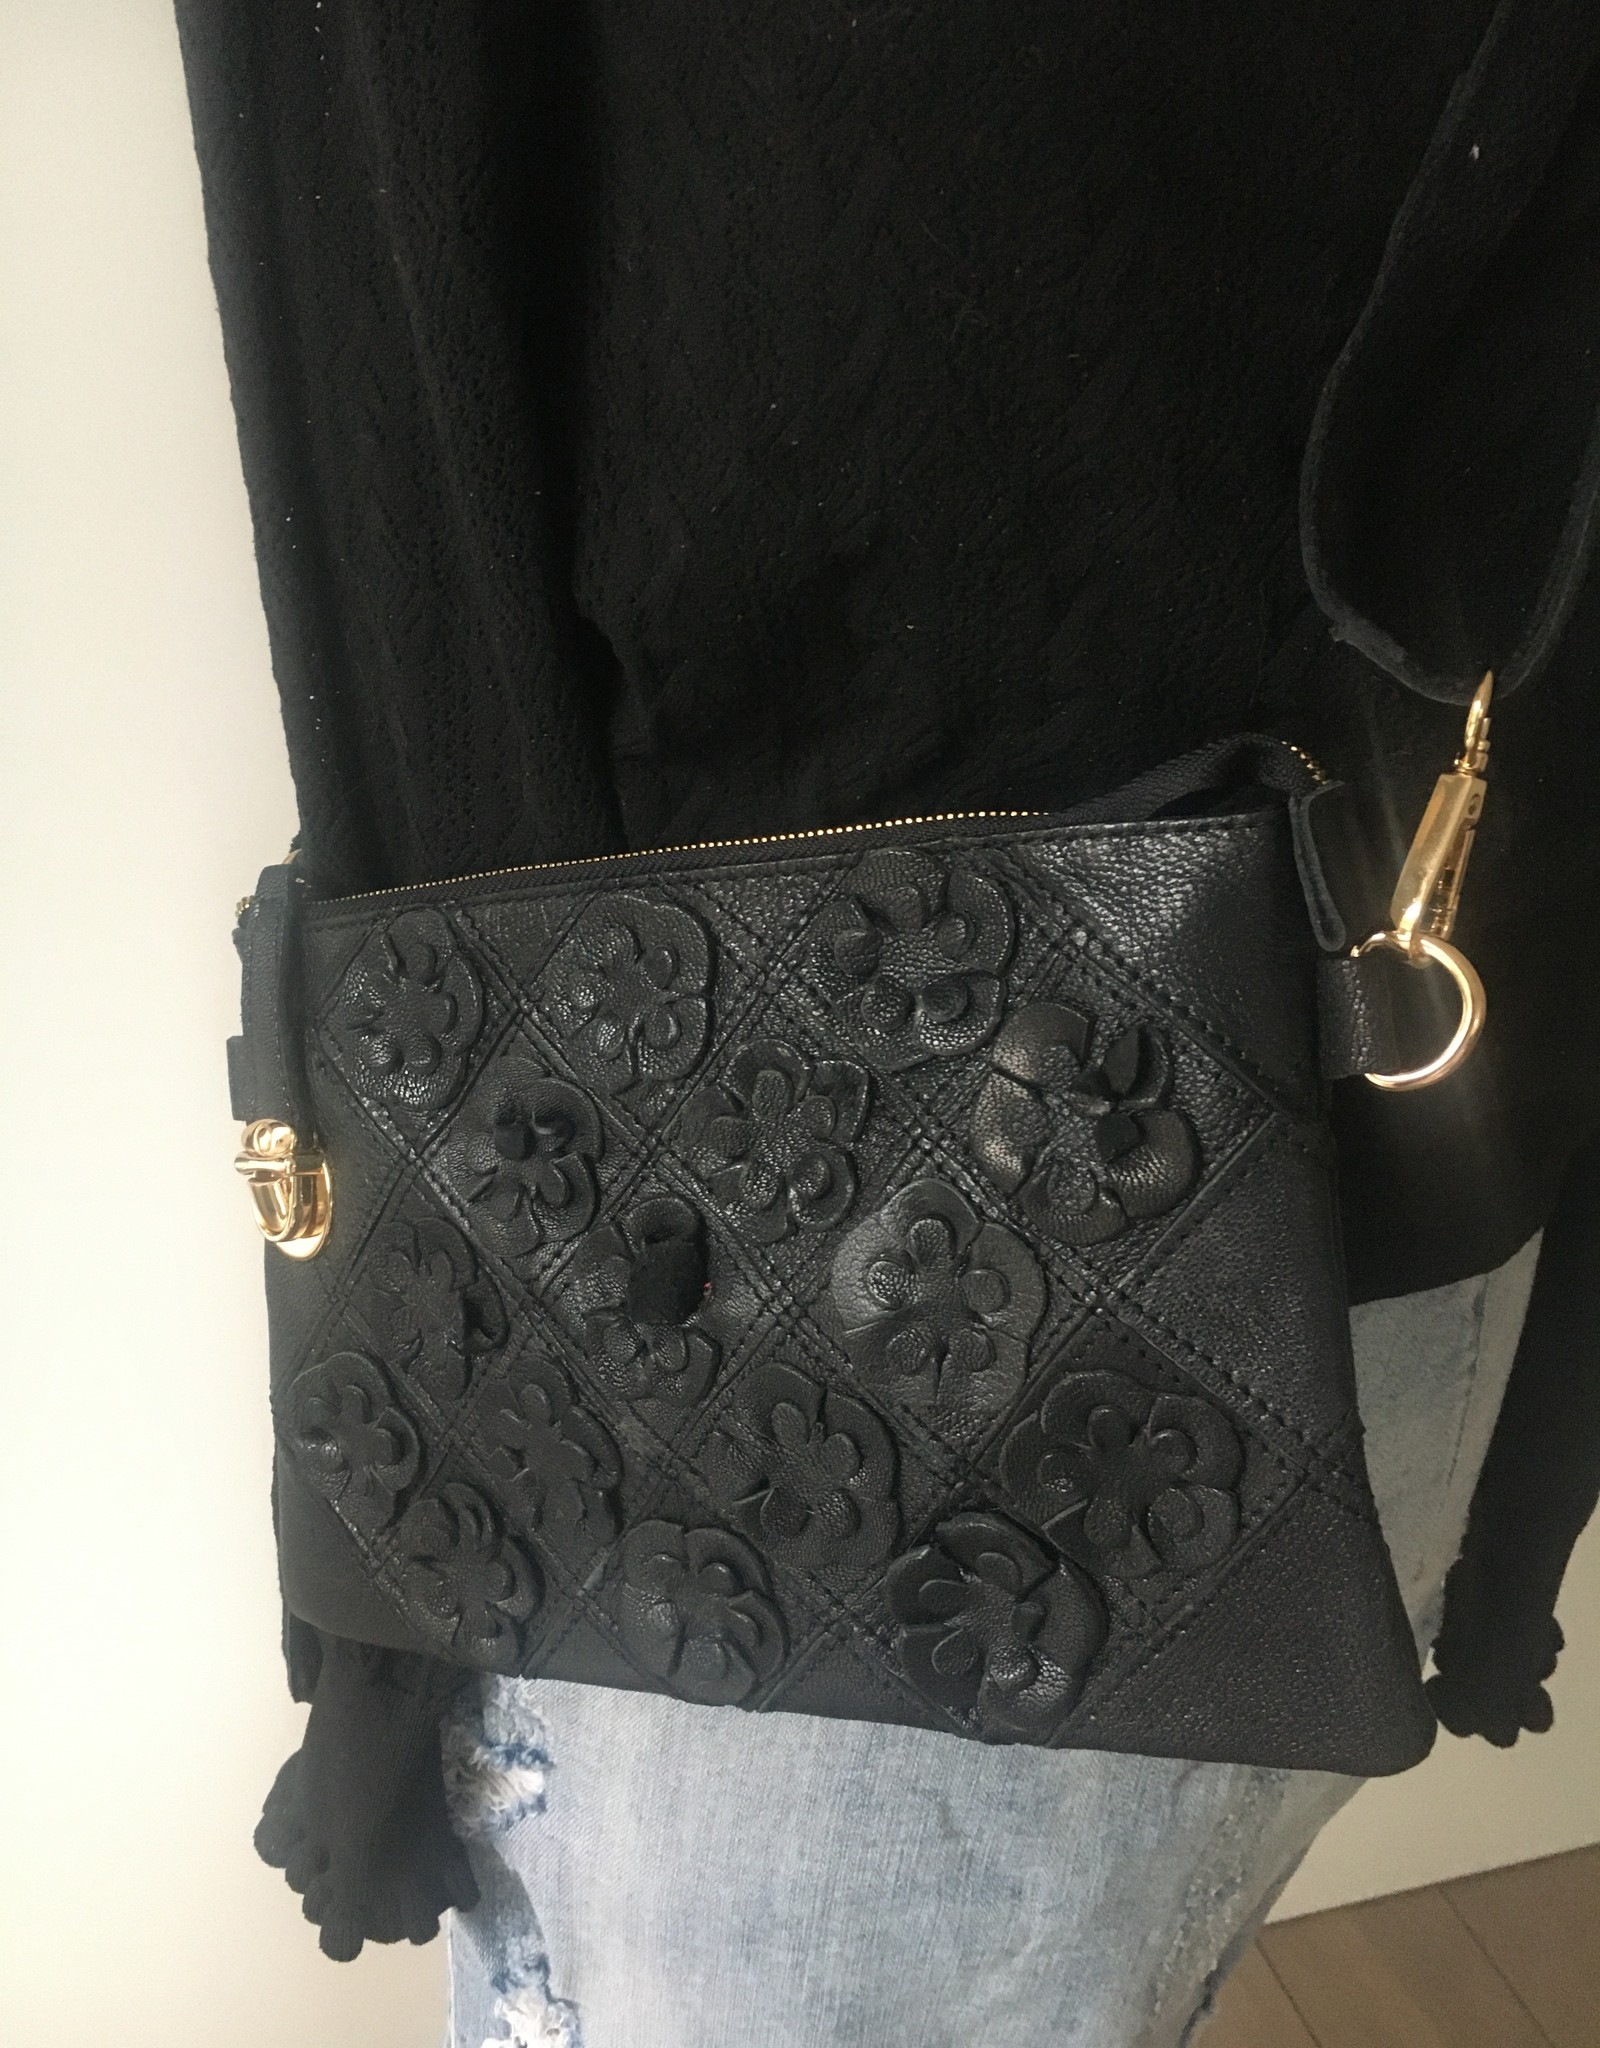 Black clutch with flowers